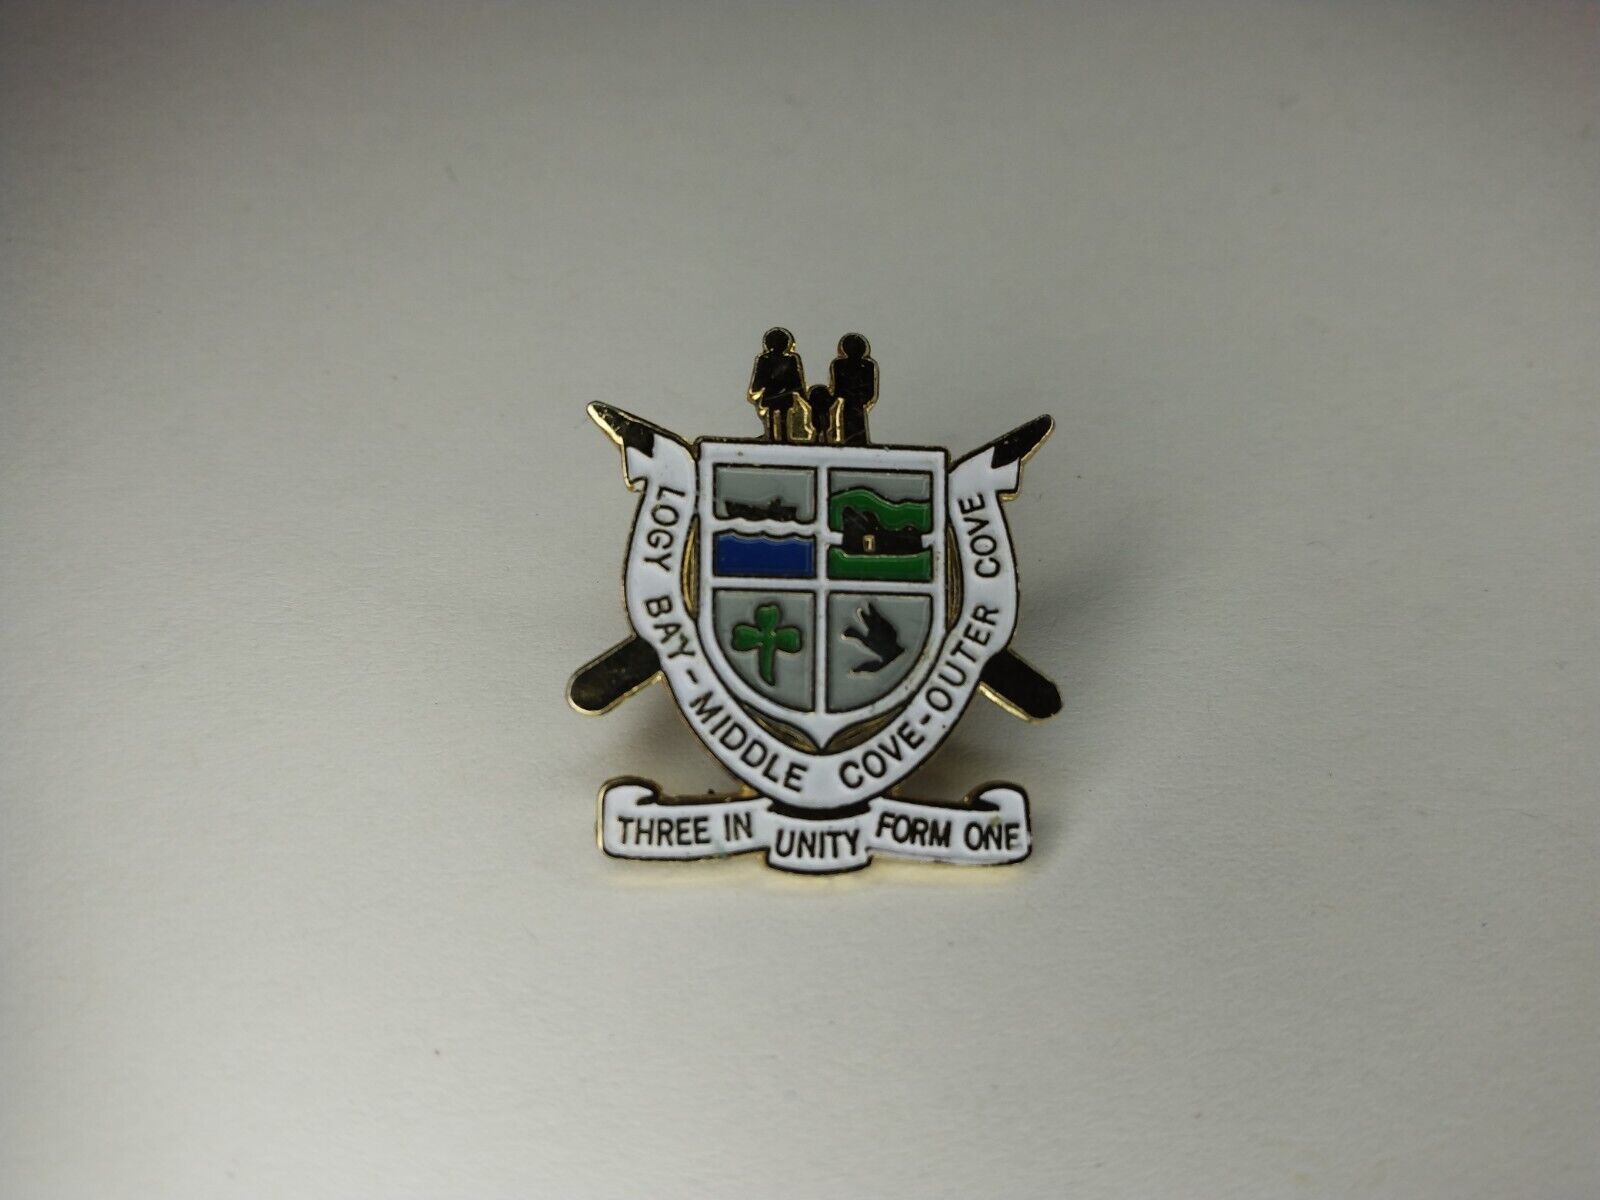 Logy Bay Middle Cove Outer Cove Newfoundland Pin - Three In Unity Form One NFLD